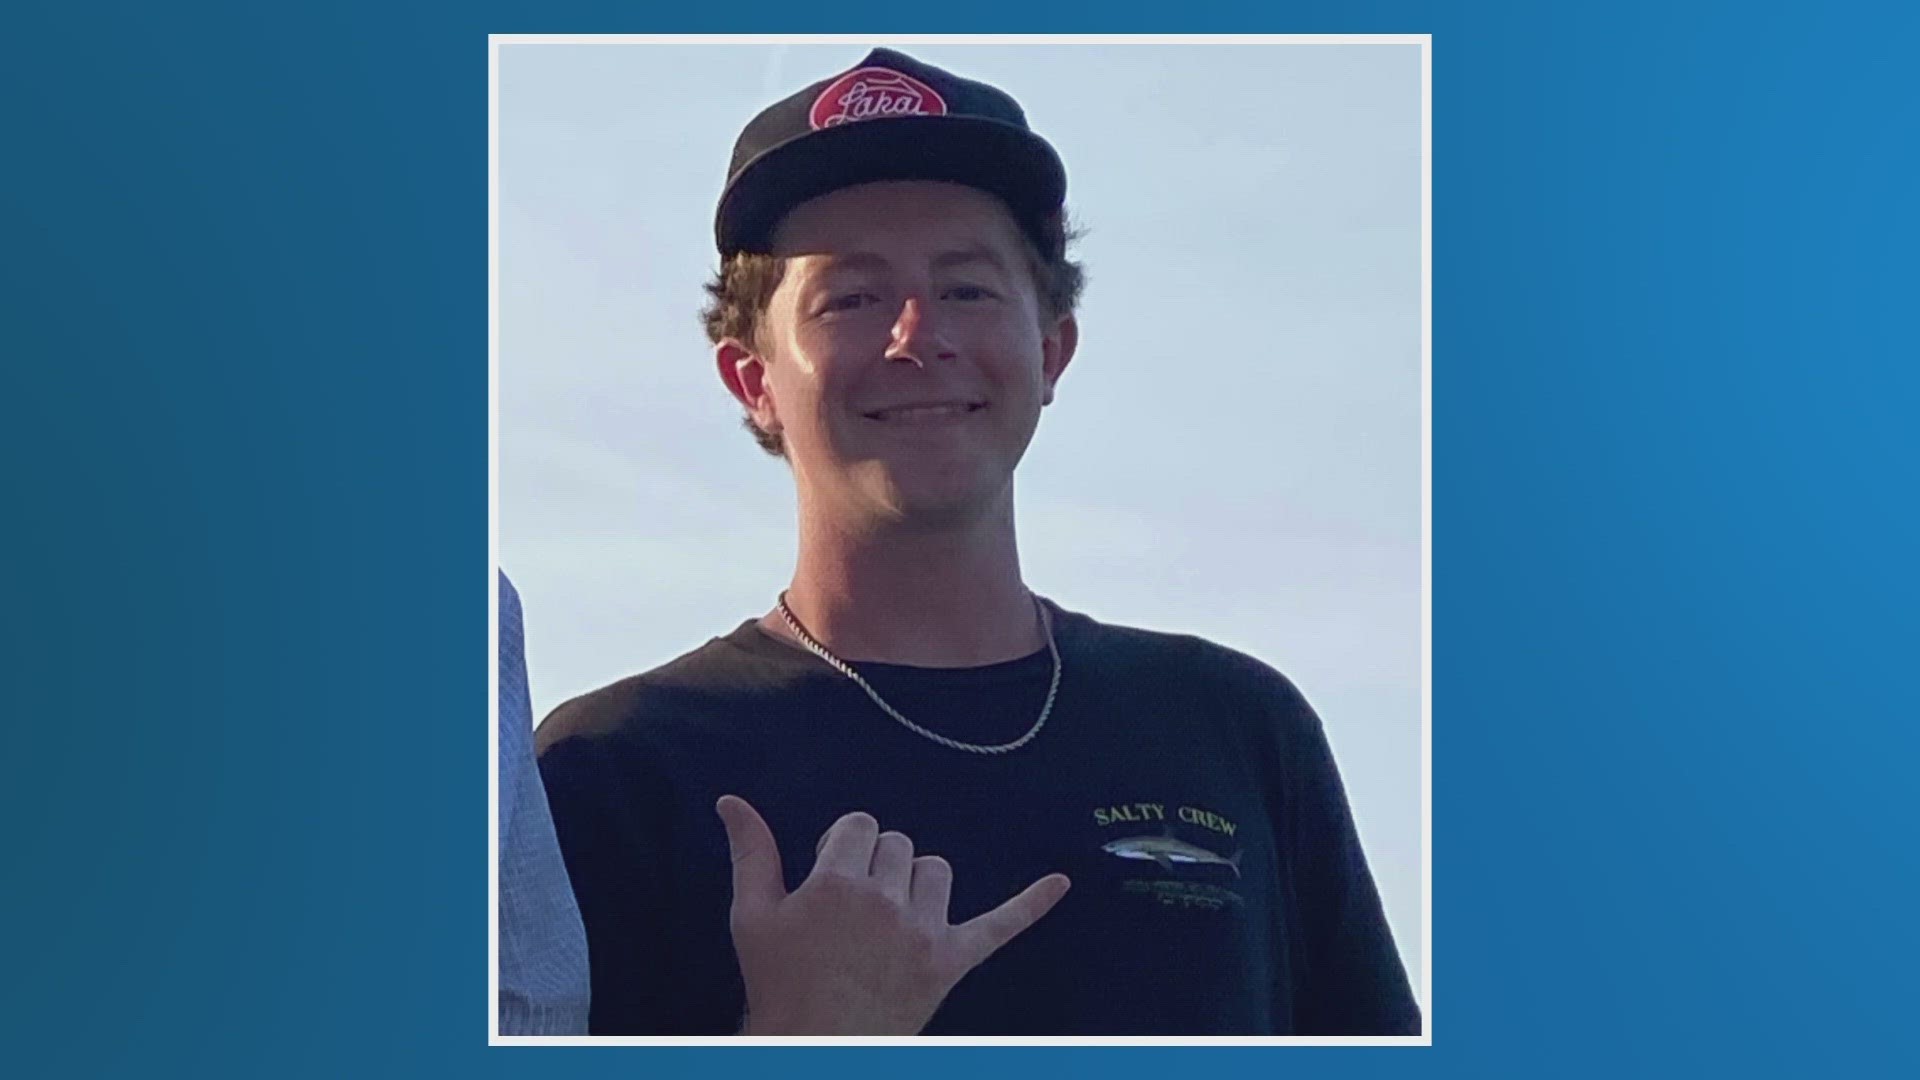 Charles Gregory was last seen Thursday in a jon boat in St. Augustine. He was found safe Saturday. First Coast News was there. He flashed the hang loose hand sign.